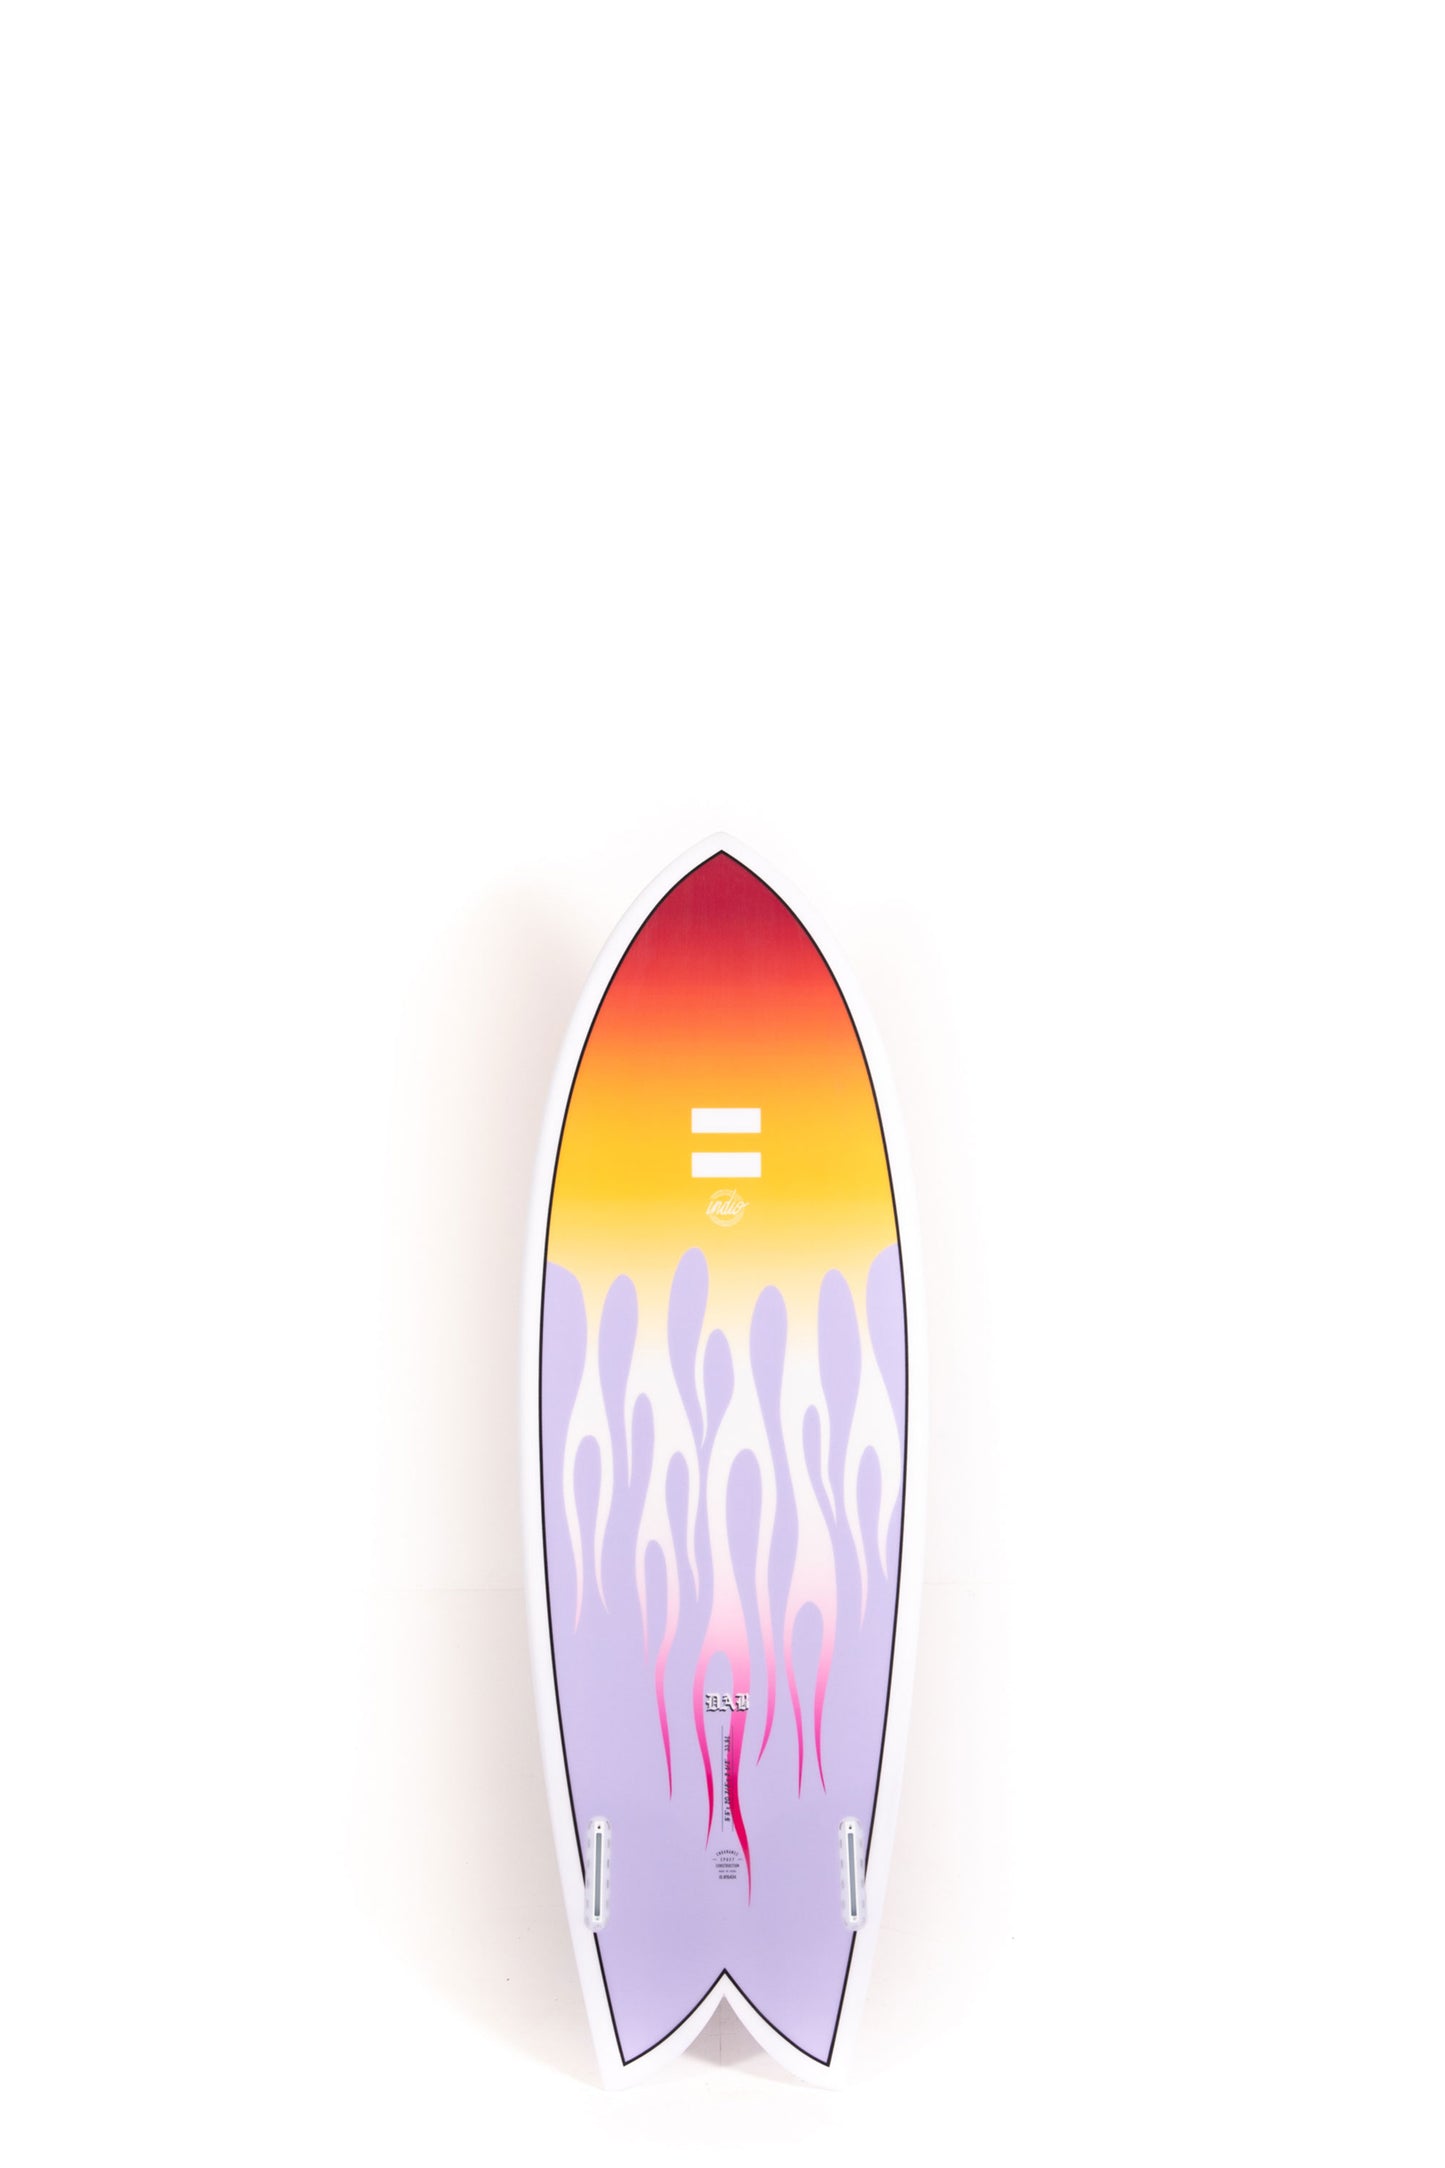 Pukas-Surf-Shop-Indio-Surfboards-Dab-fire-5_5_